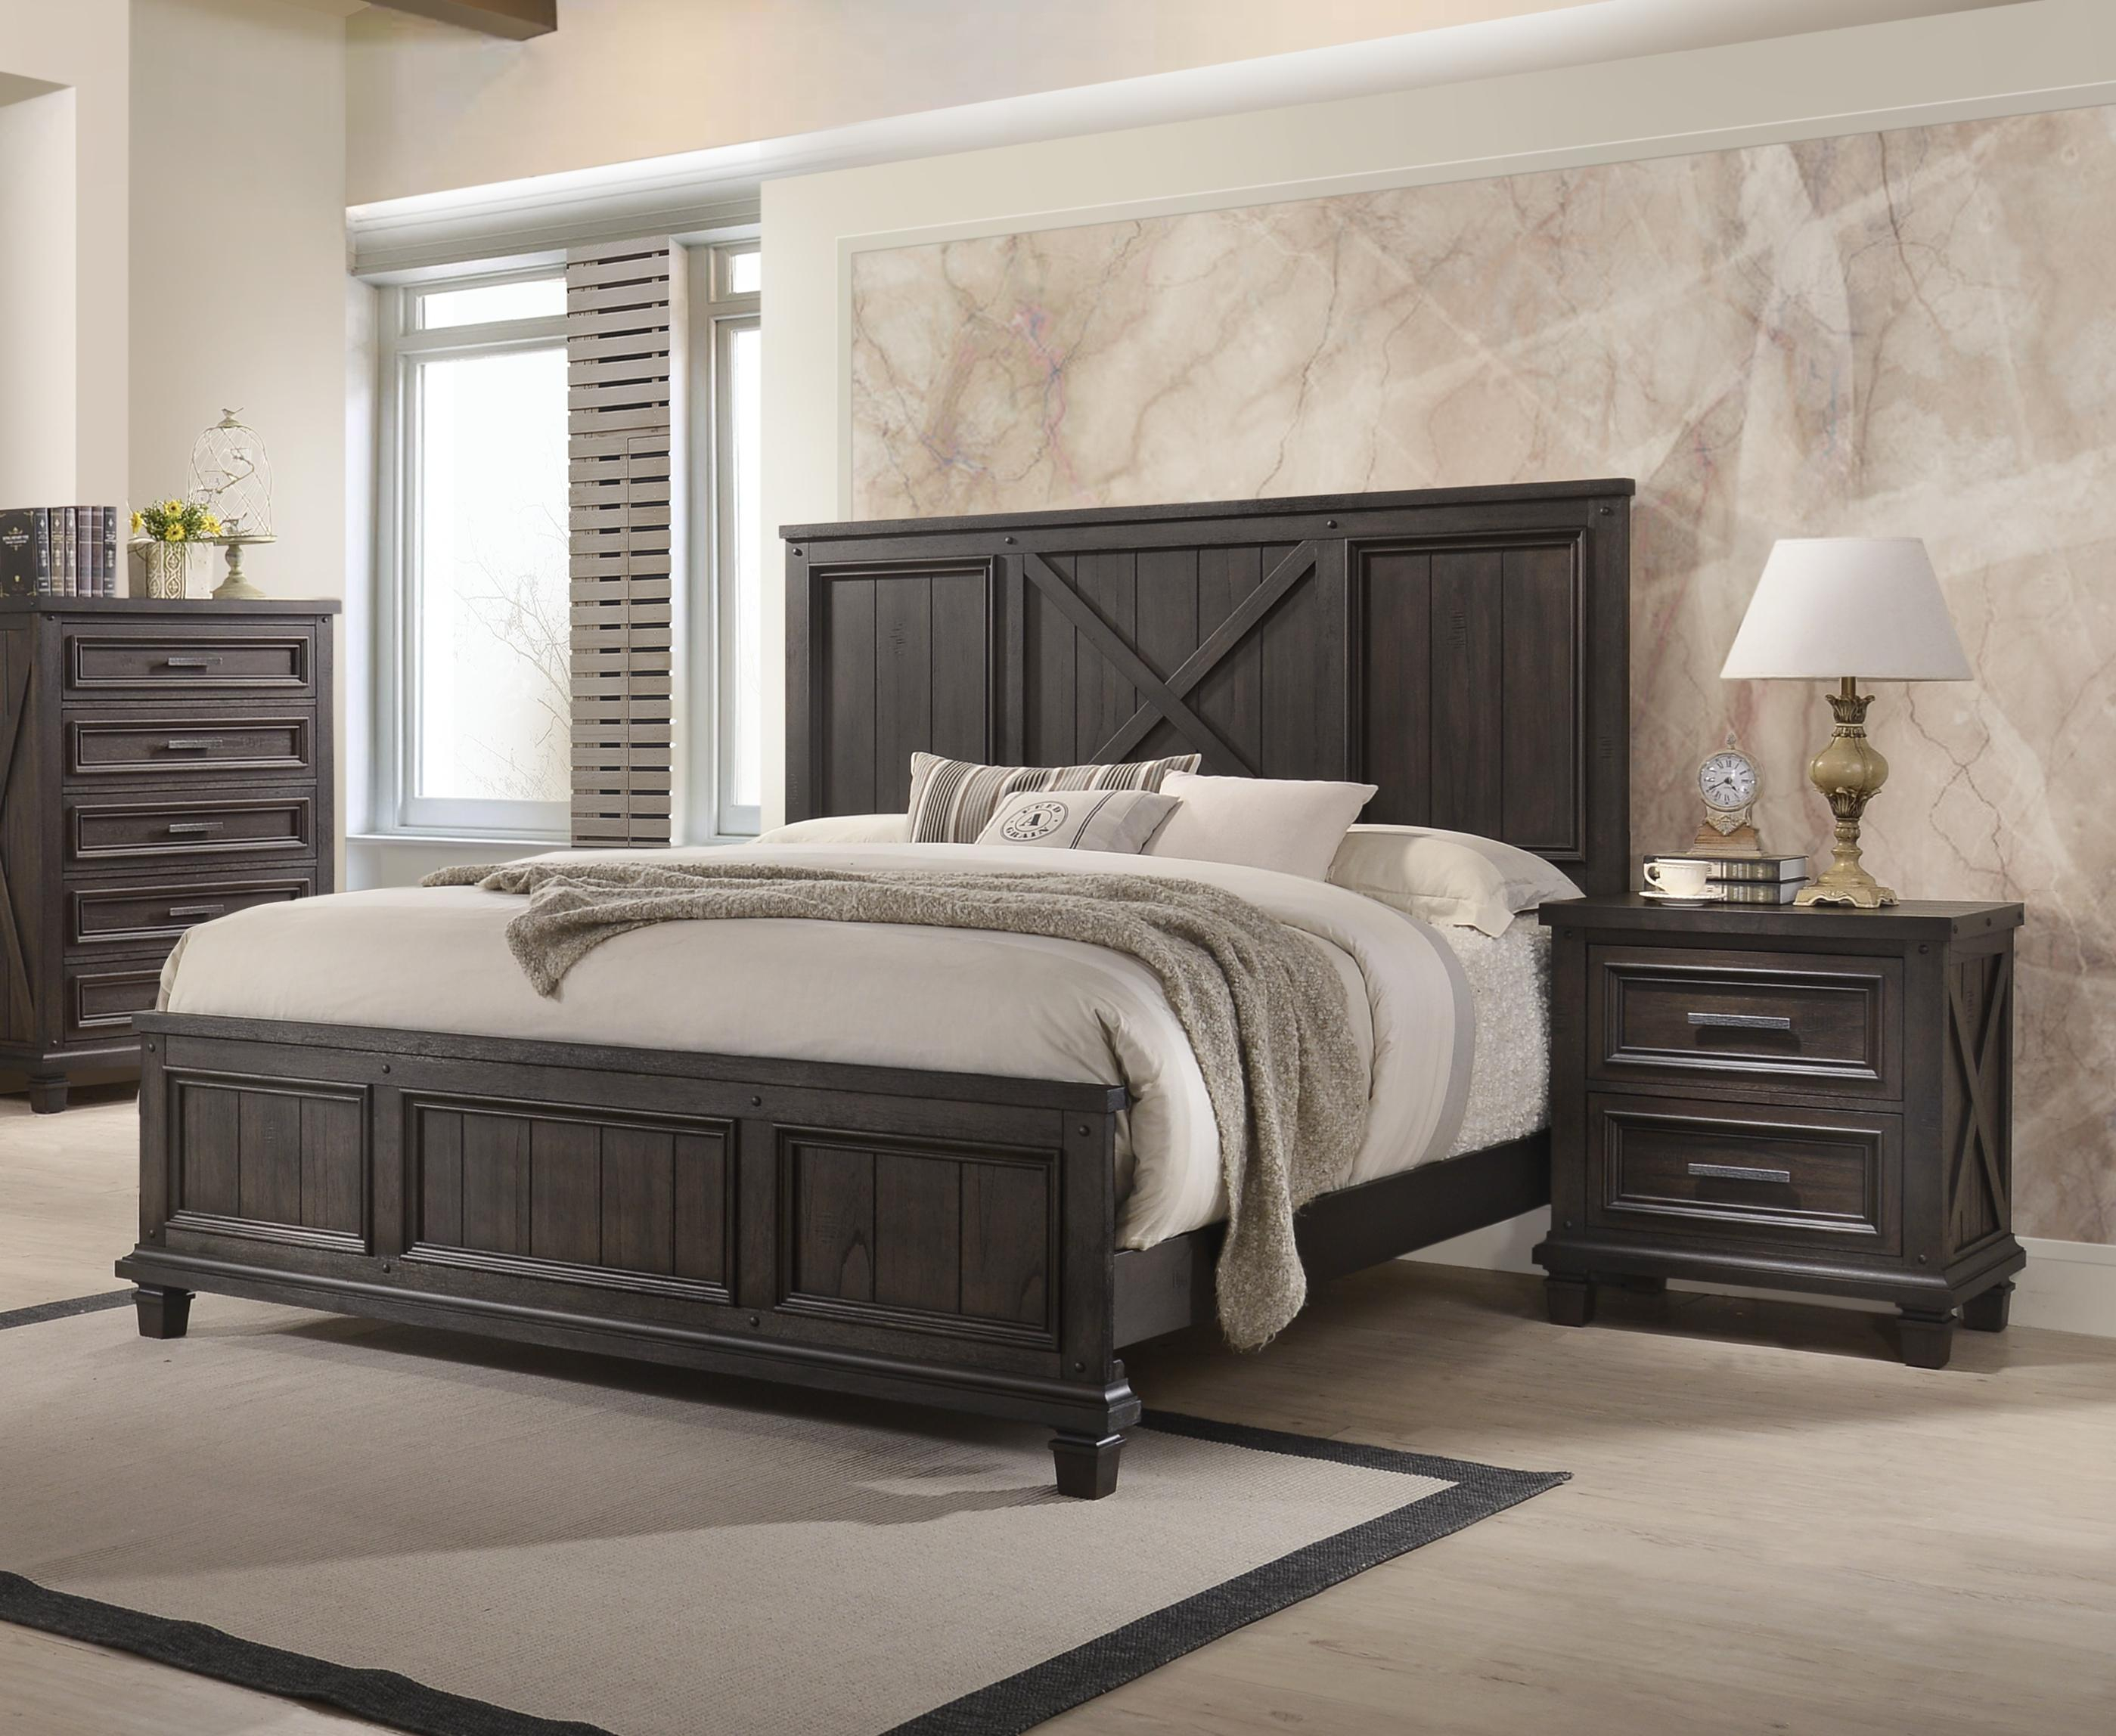 Lane Home Cimarron Java 2pc Bedroom Set With Queen Bed within dimensions 2798 X 2296